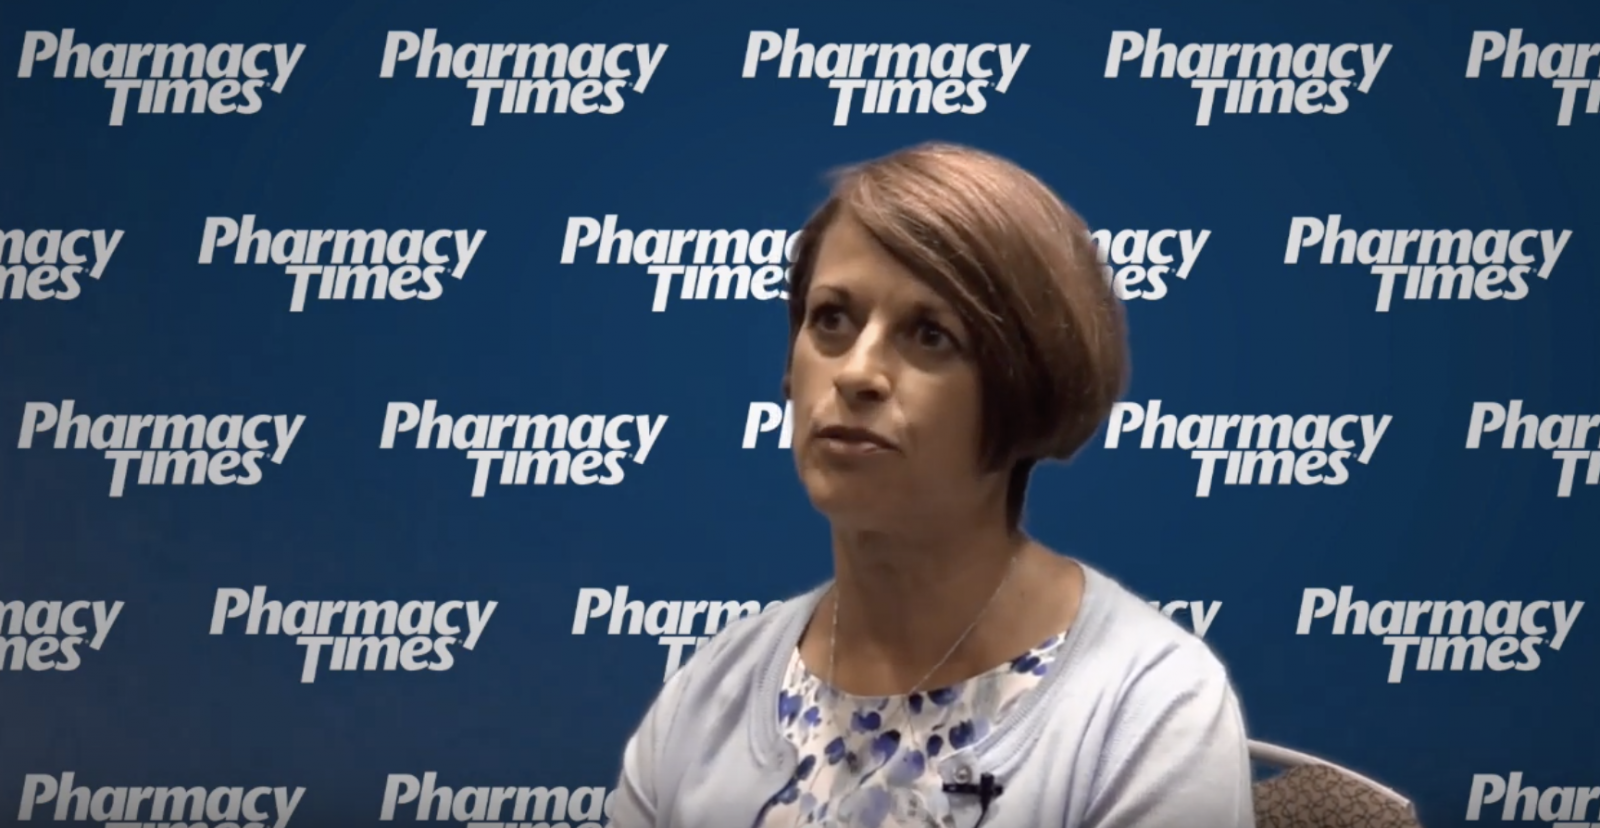 Precision Medicine for Practicing Pharmacists